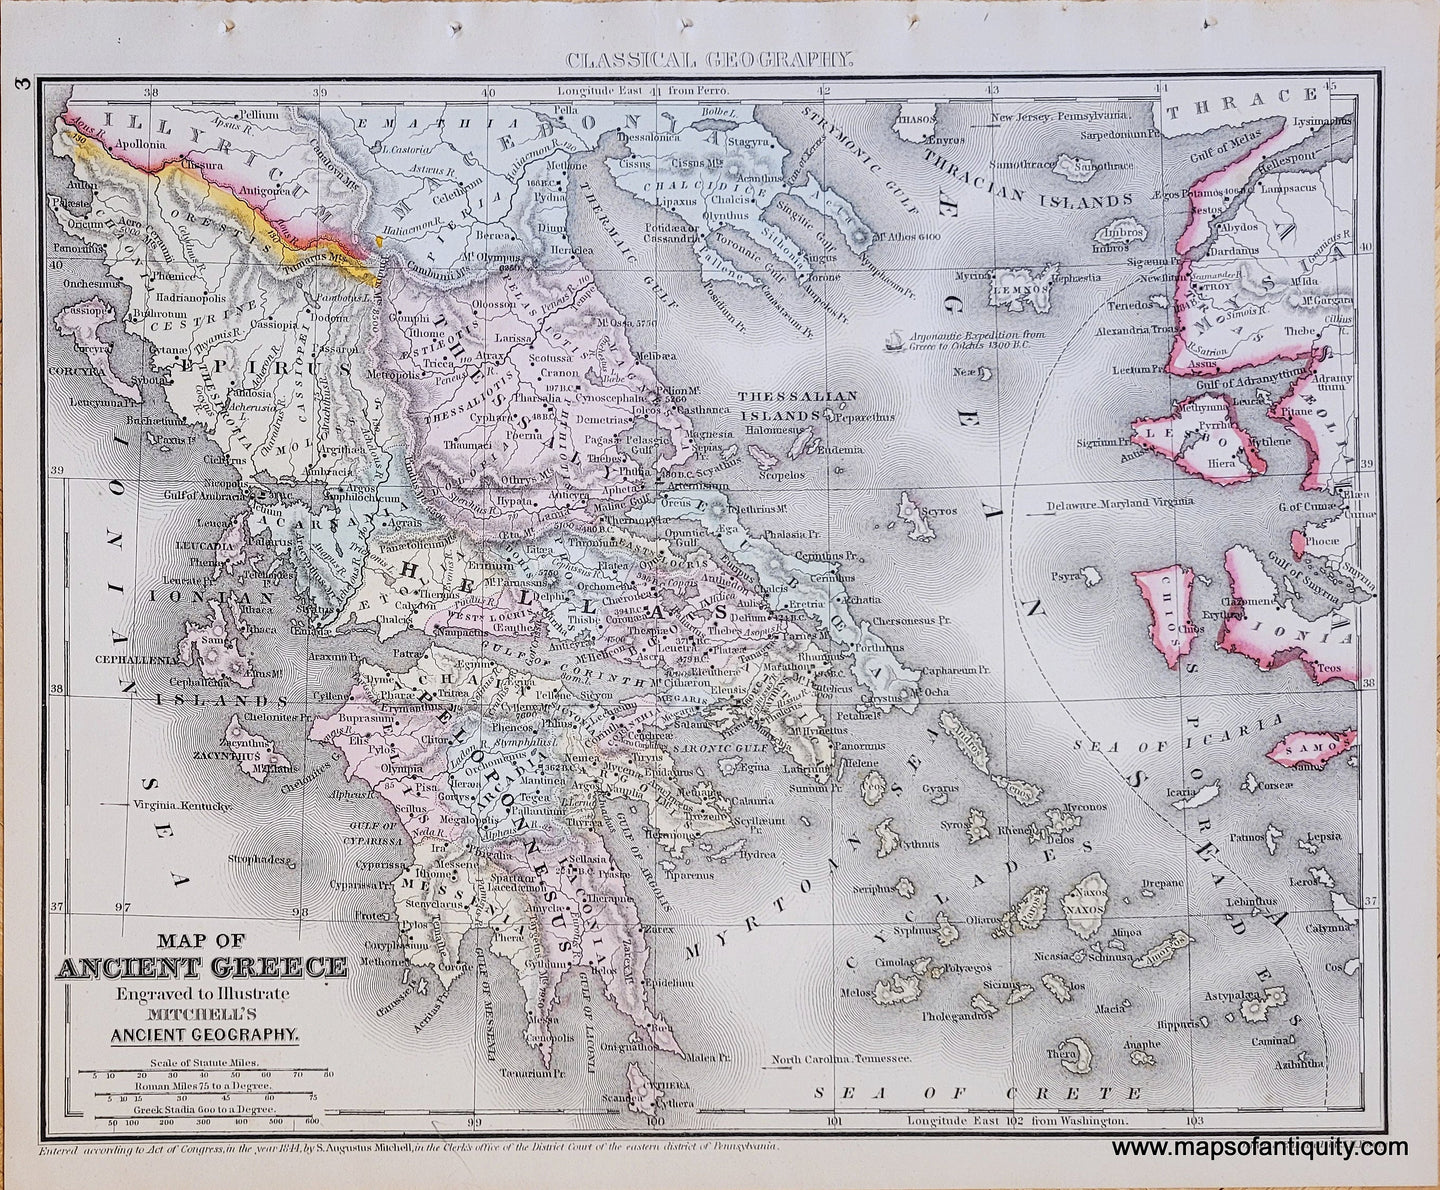 Genuine-Antique-Map-Map-of-Ancient-Greece-Engraved-to-Illustrate-Mitchells-Ancient-Geography-Ancient-World-Greece-1871-Mitchell-Maps-Of-Antiquity-1800s-19th-century